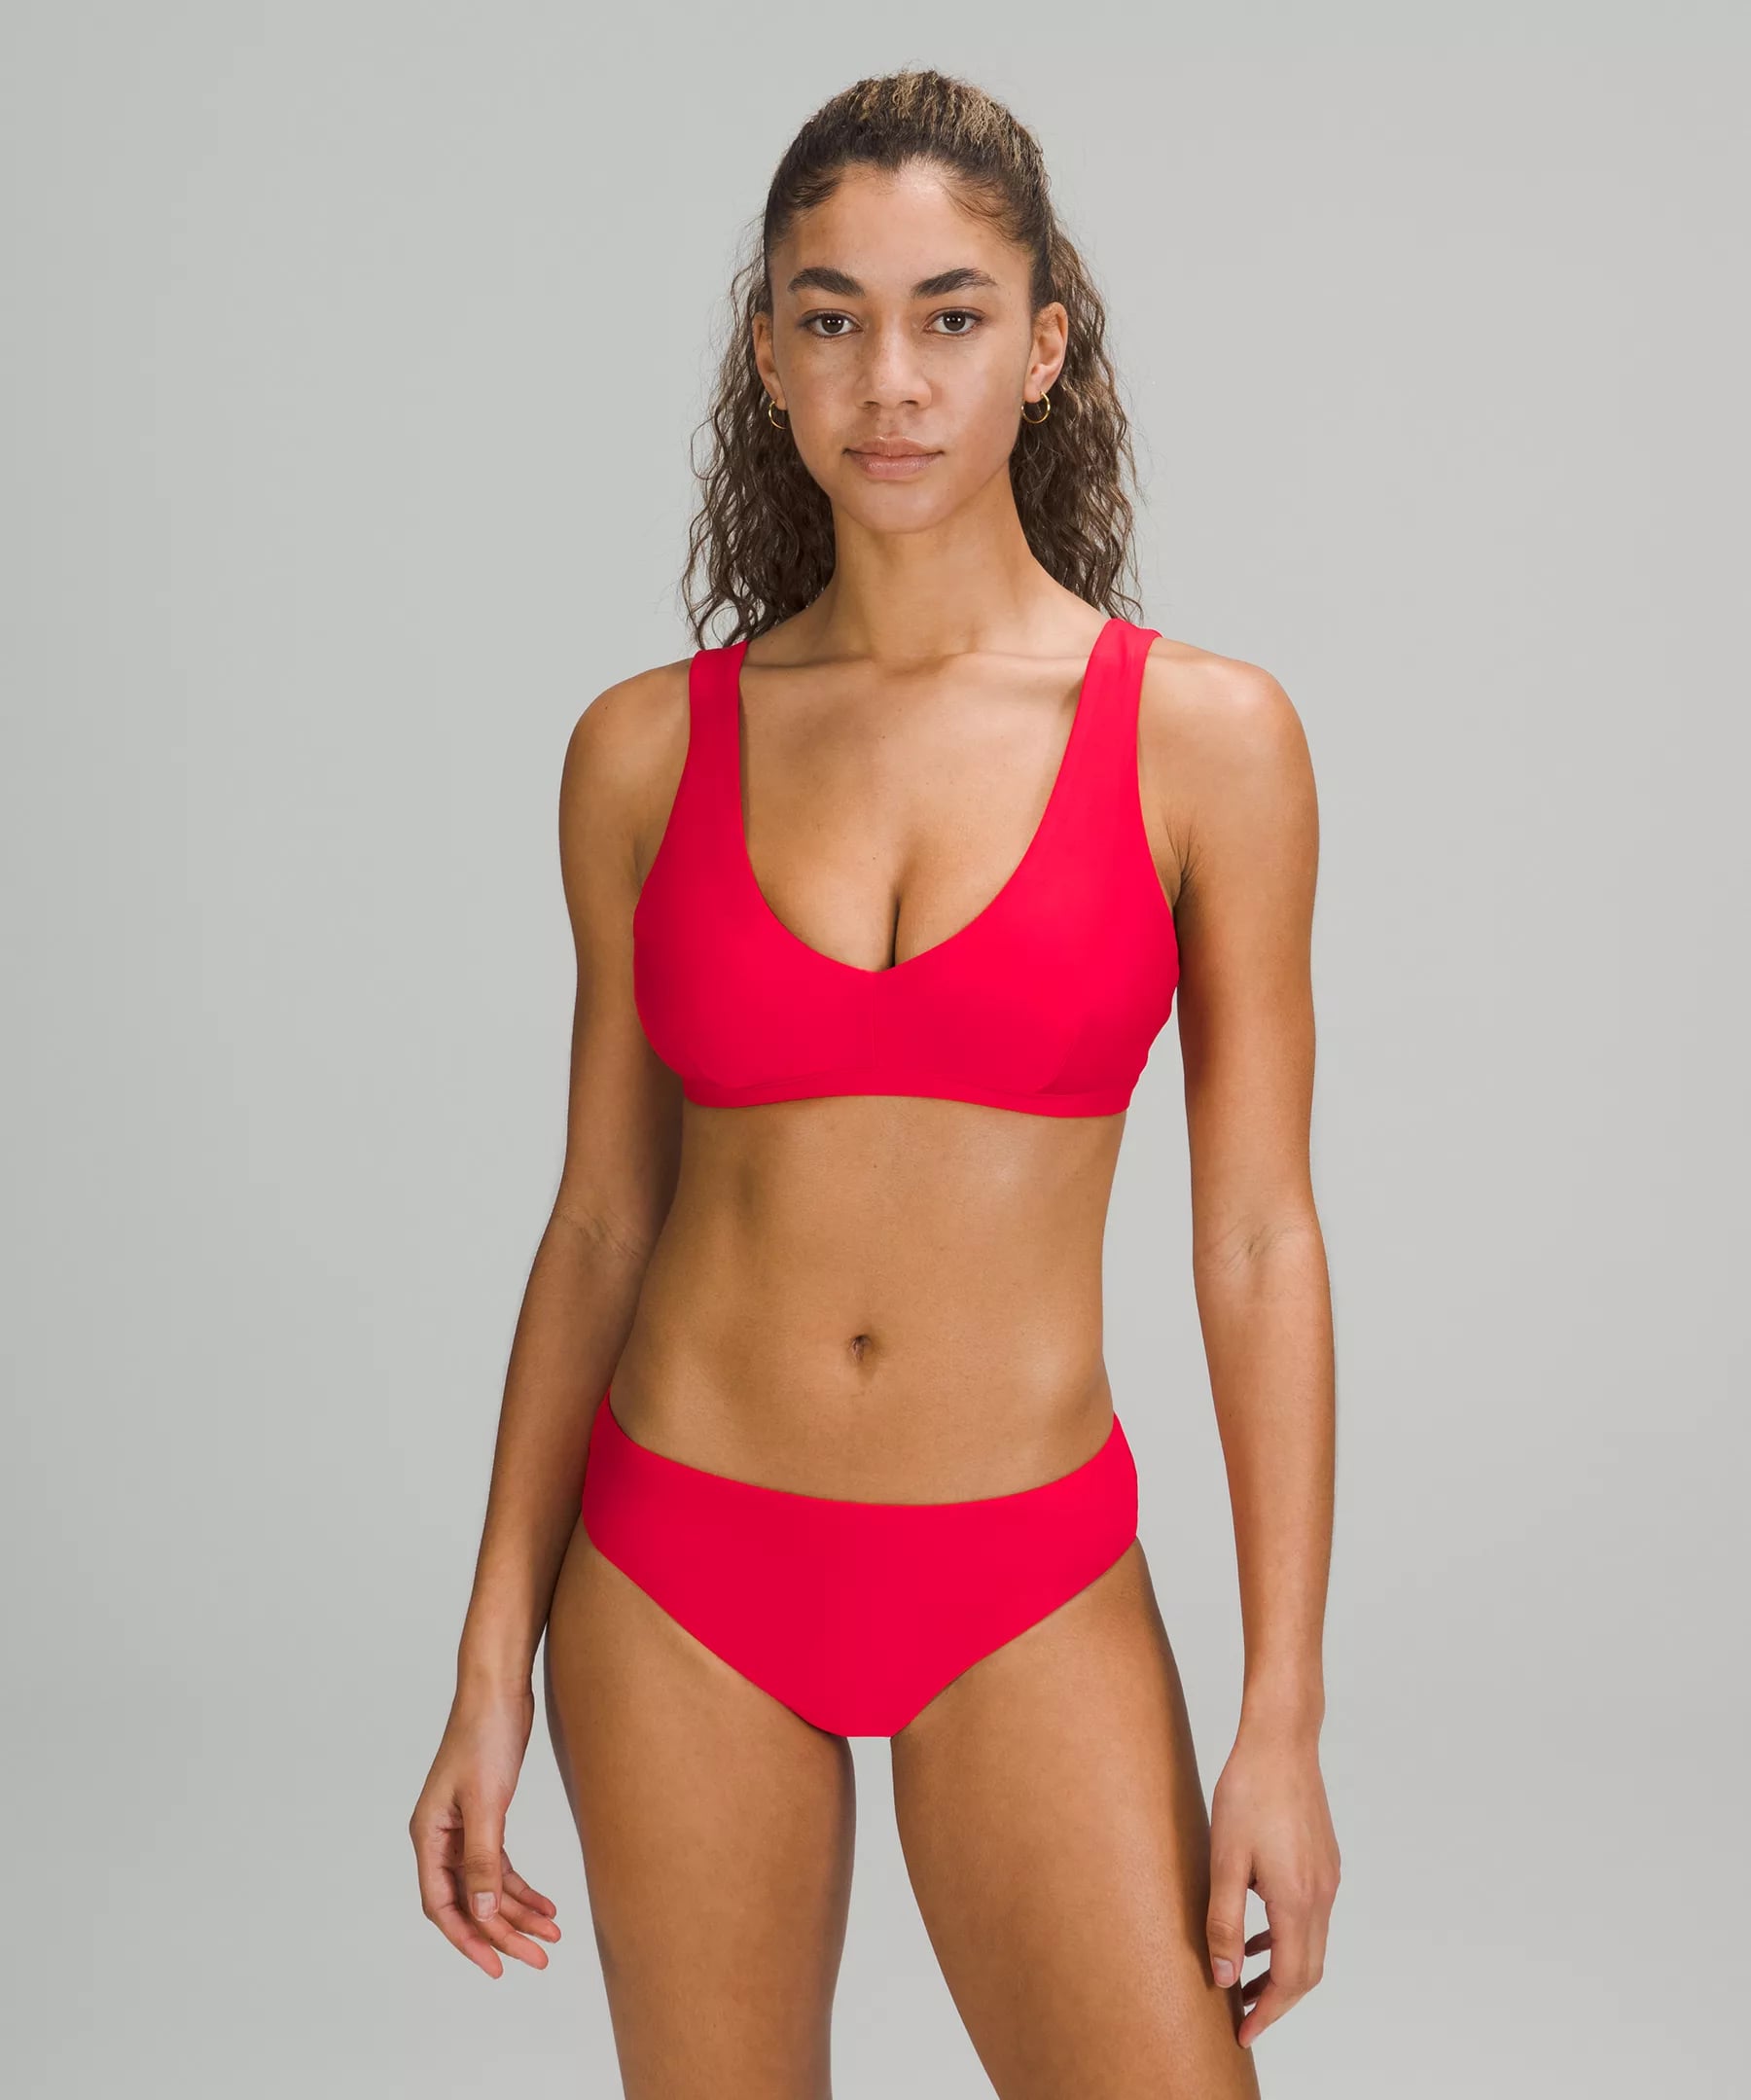 A Sporty Top: Lululemon Waterside V Swim Top C/D Cup, 11 Lululemon  Swimsuits You Can Be Active In